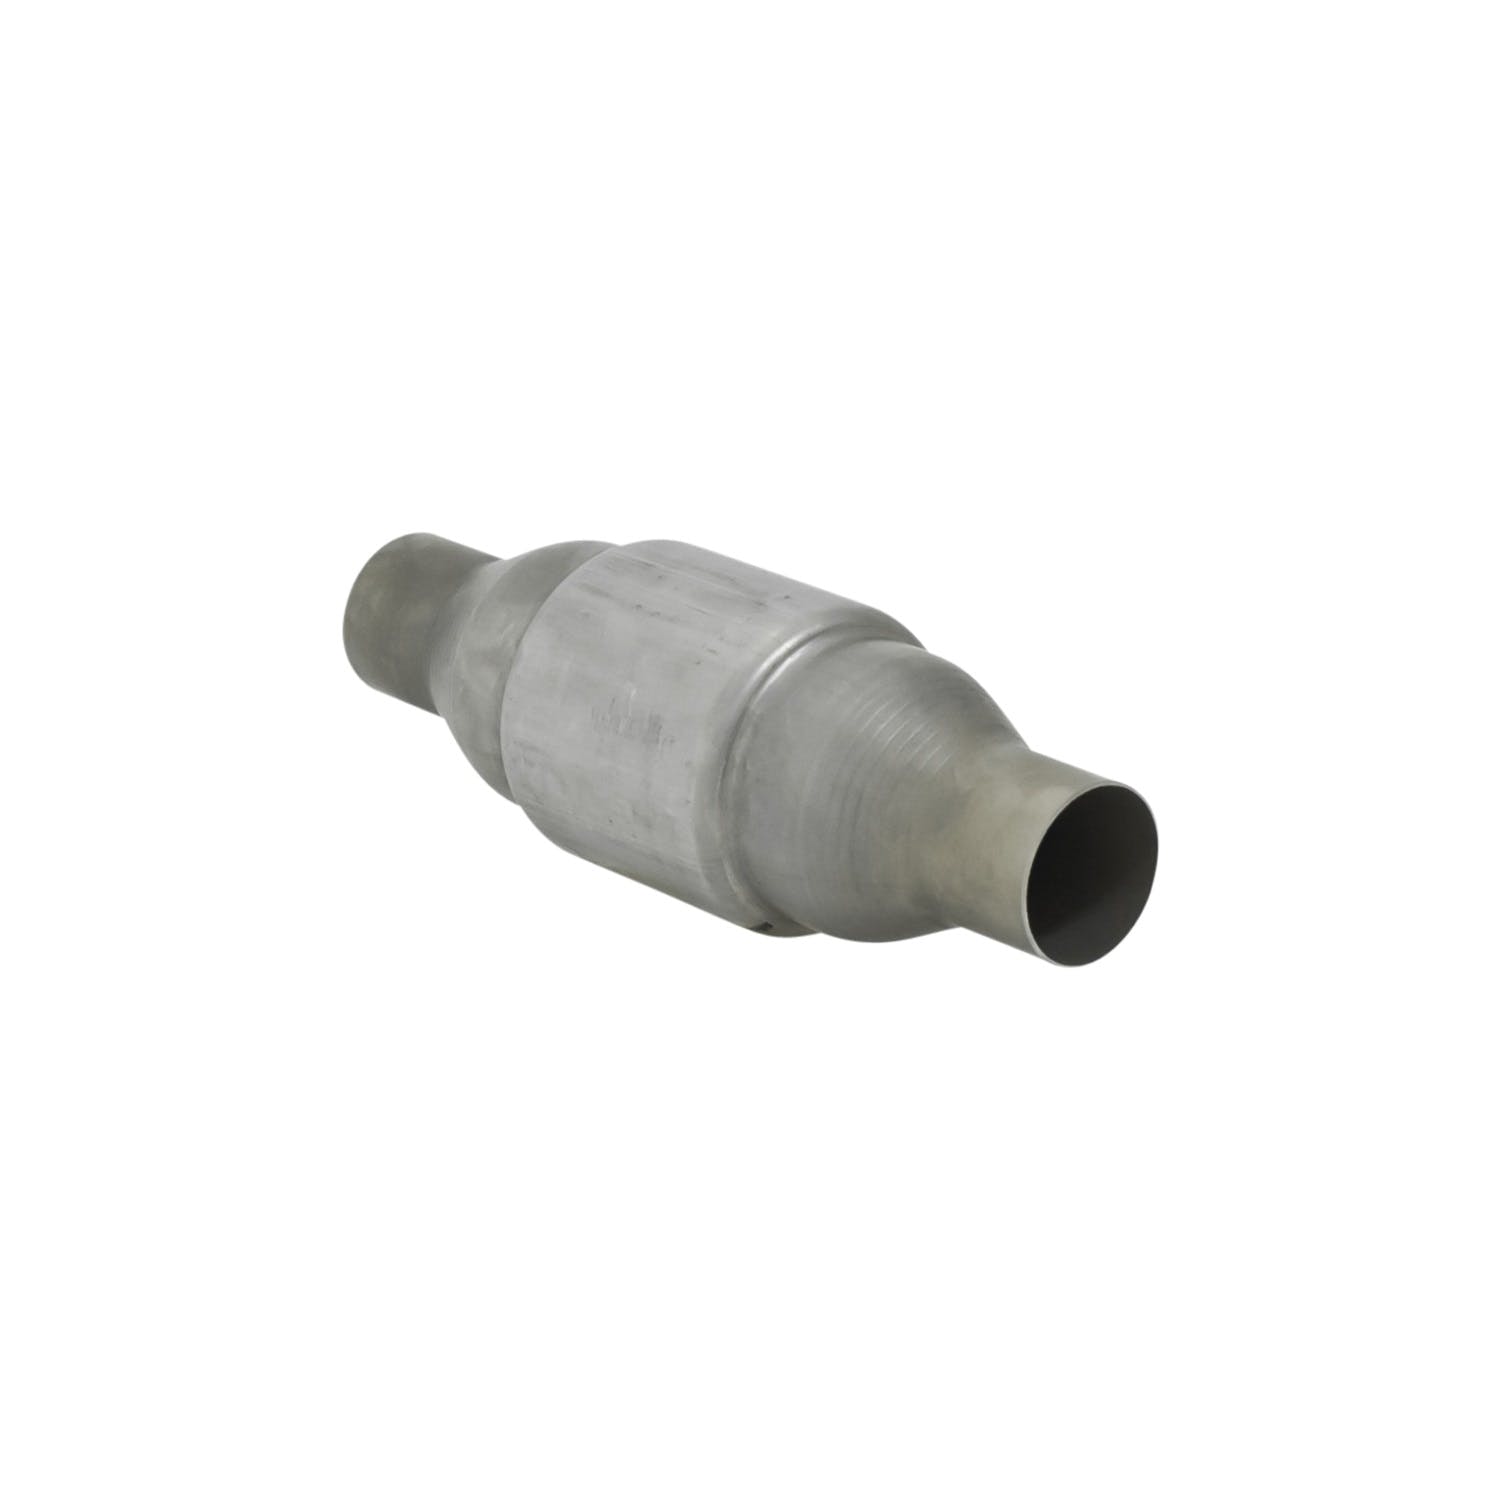 Flowmaster Catalytic Converters 2000125 Catalytic Converter-Universal-200 Series-2.50 in Inlet/Outlet-49 State